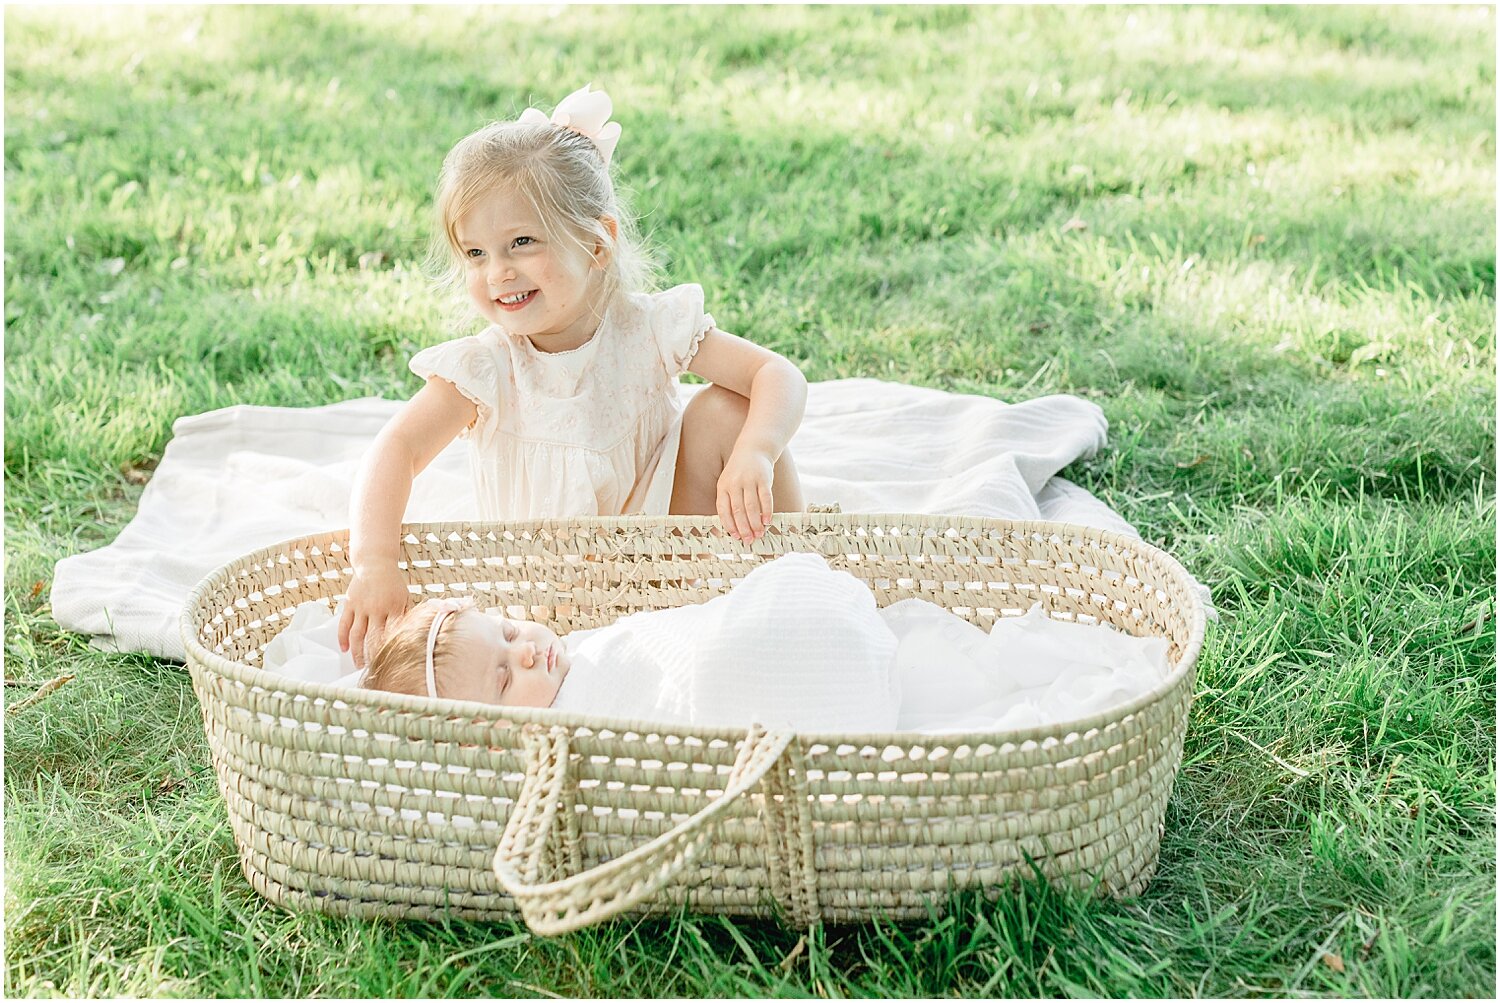 Outdoor Newborn Session in Connecticut by Kristin Wood Photography